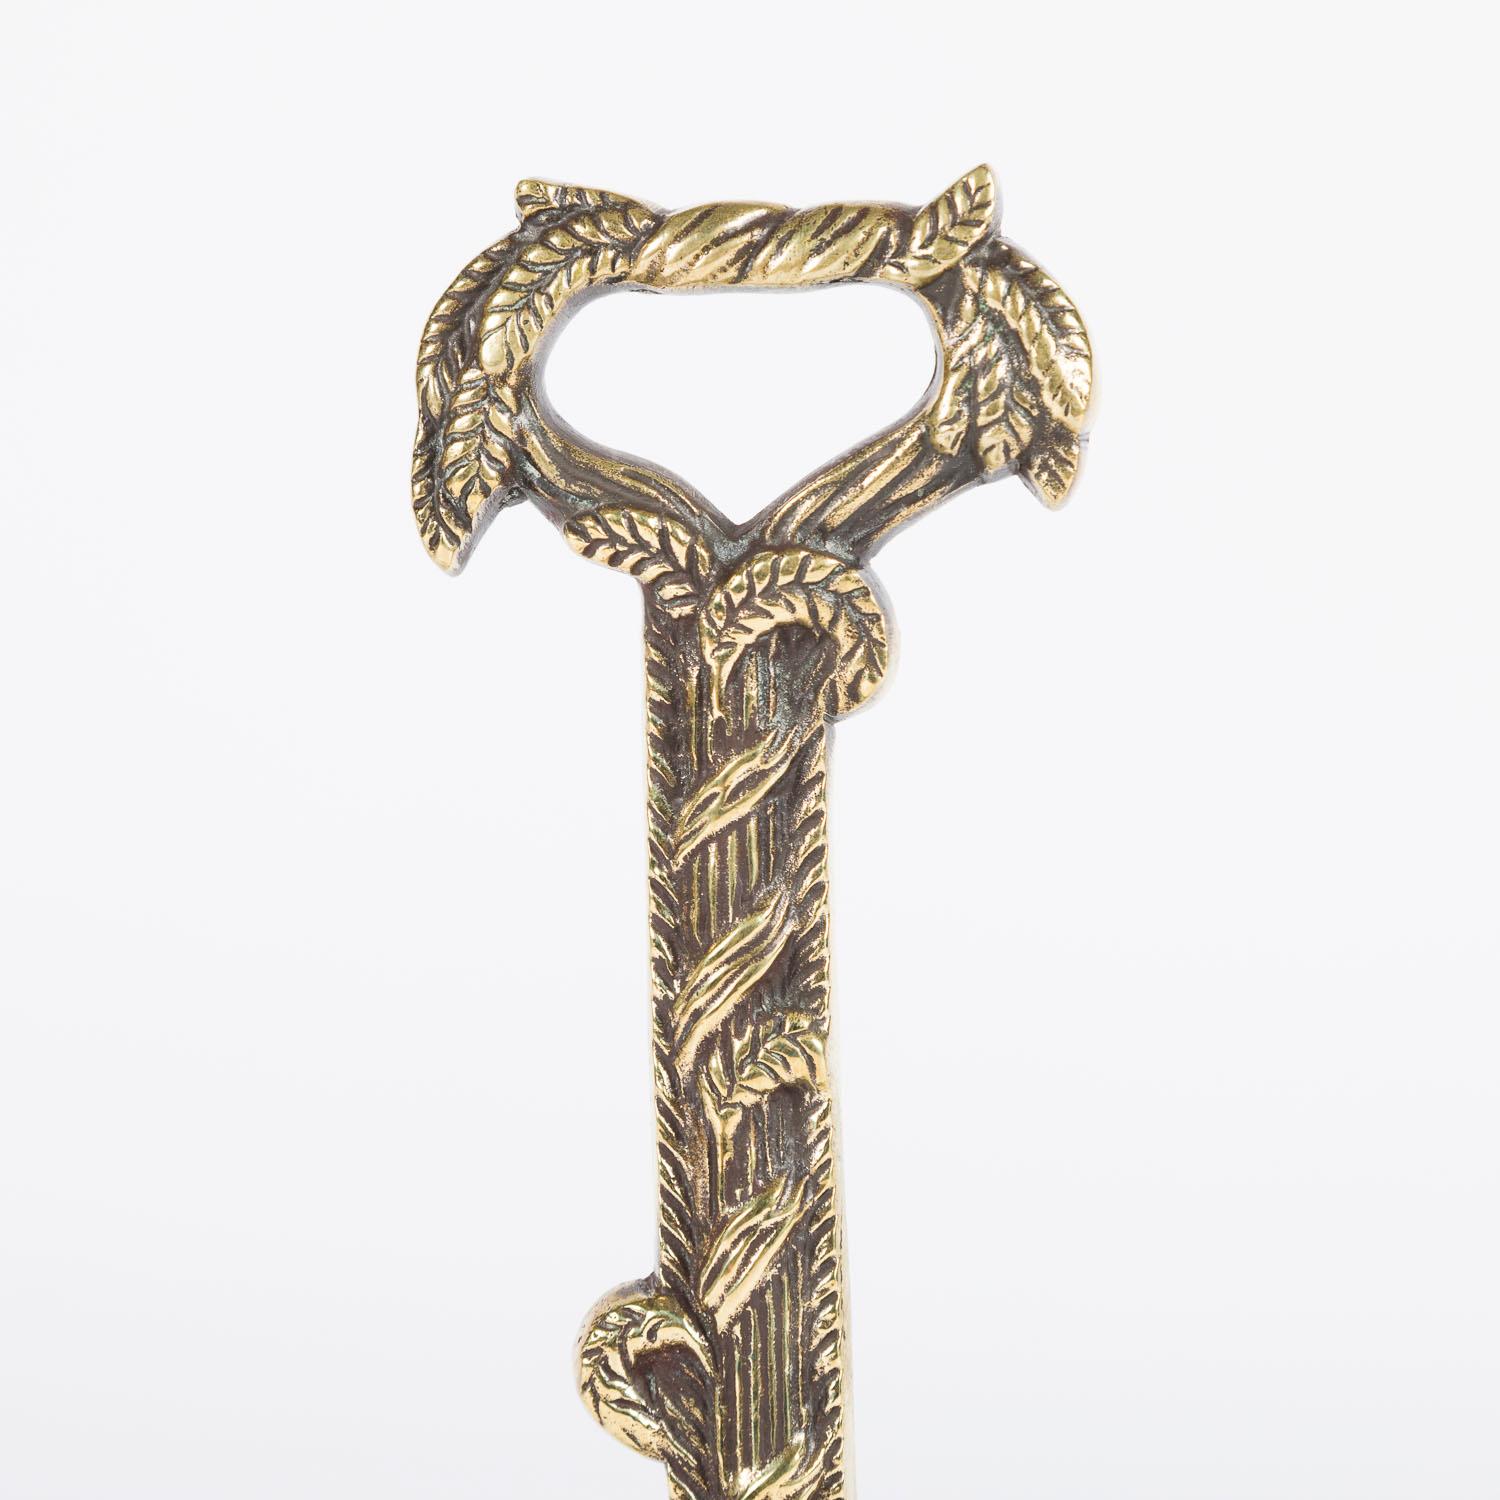 A 19th century brass harvest basket door porter.

The handle formed of intertwined wheat and the base in the form of a wicker basket containing cherries and flowers.

Iron weight base.

Weight. 2.5 kilos.